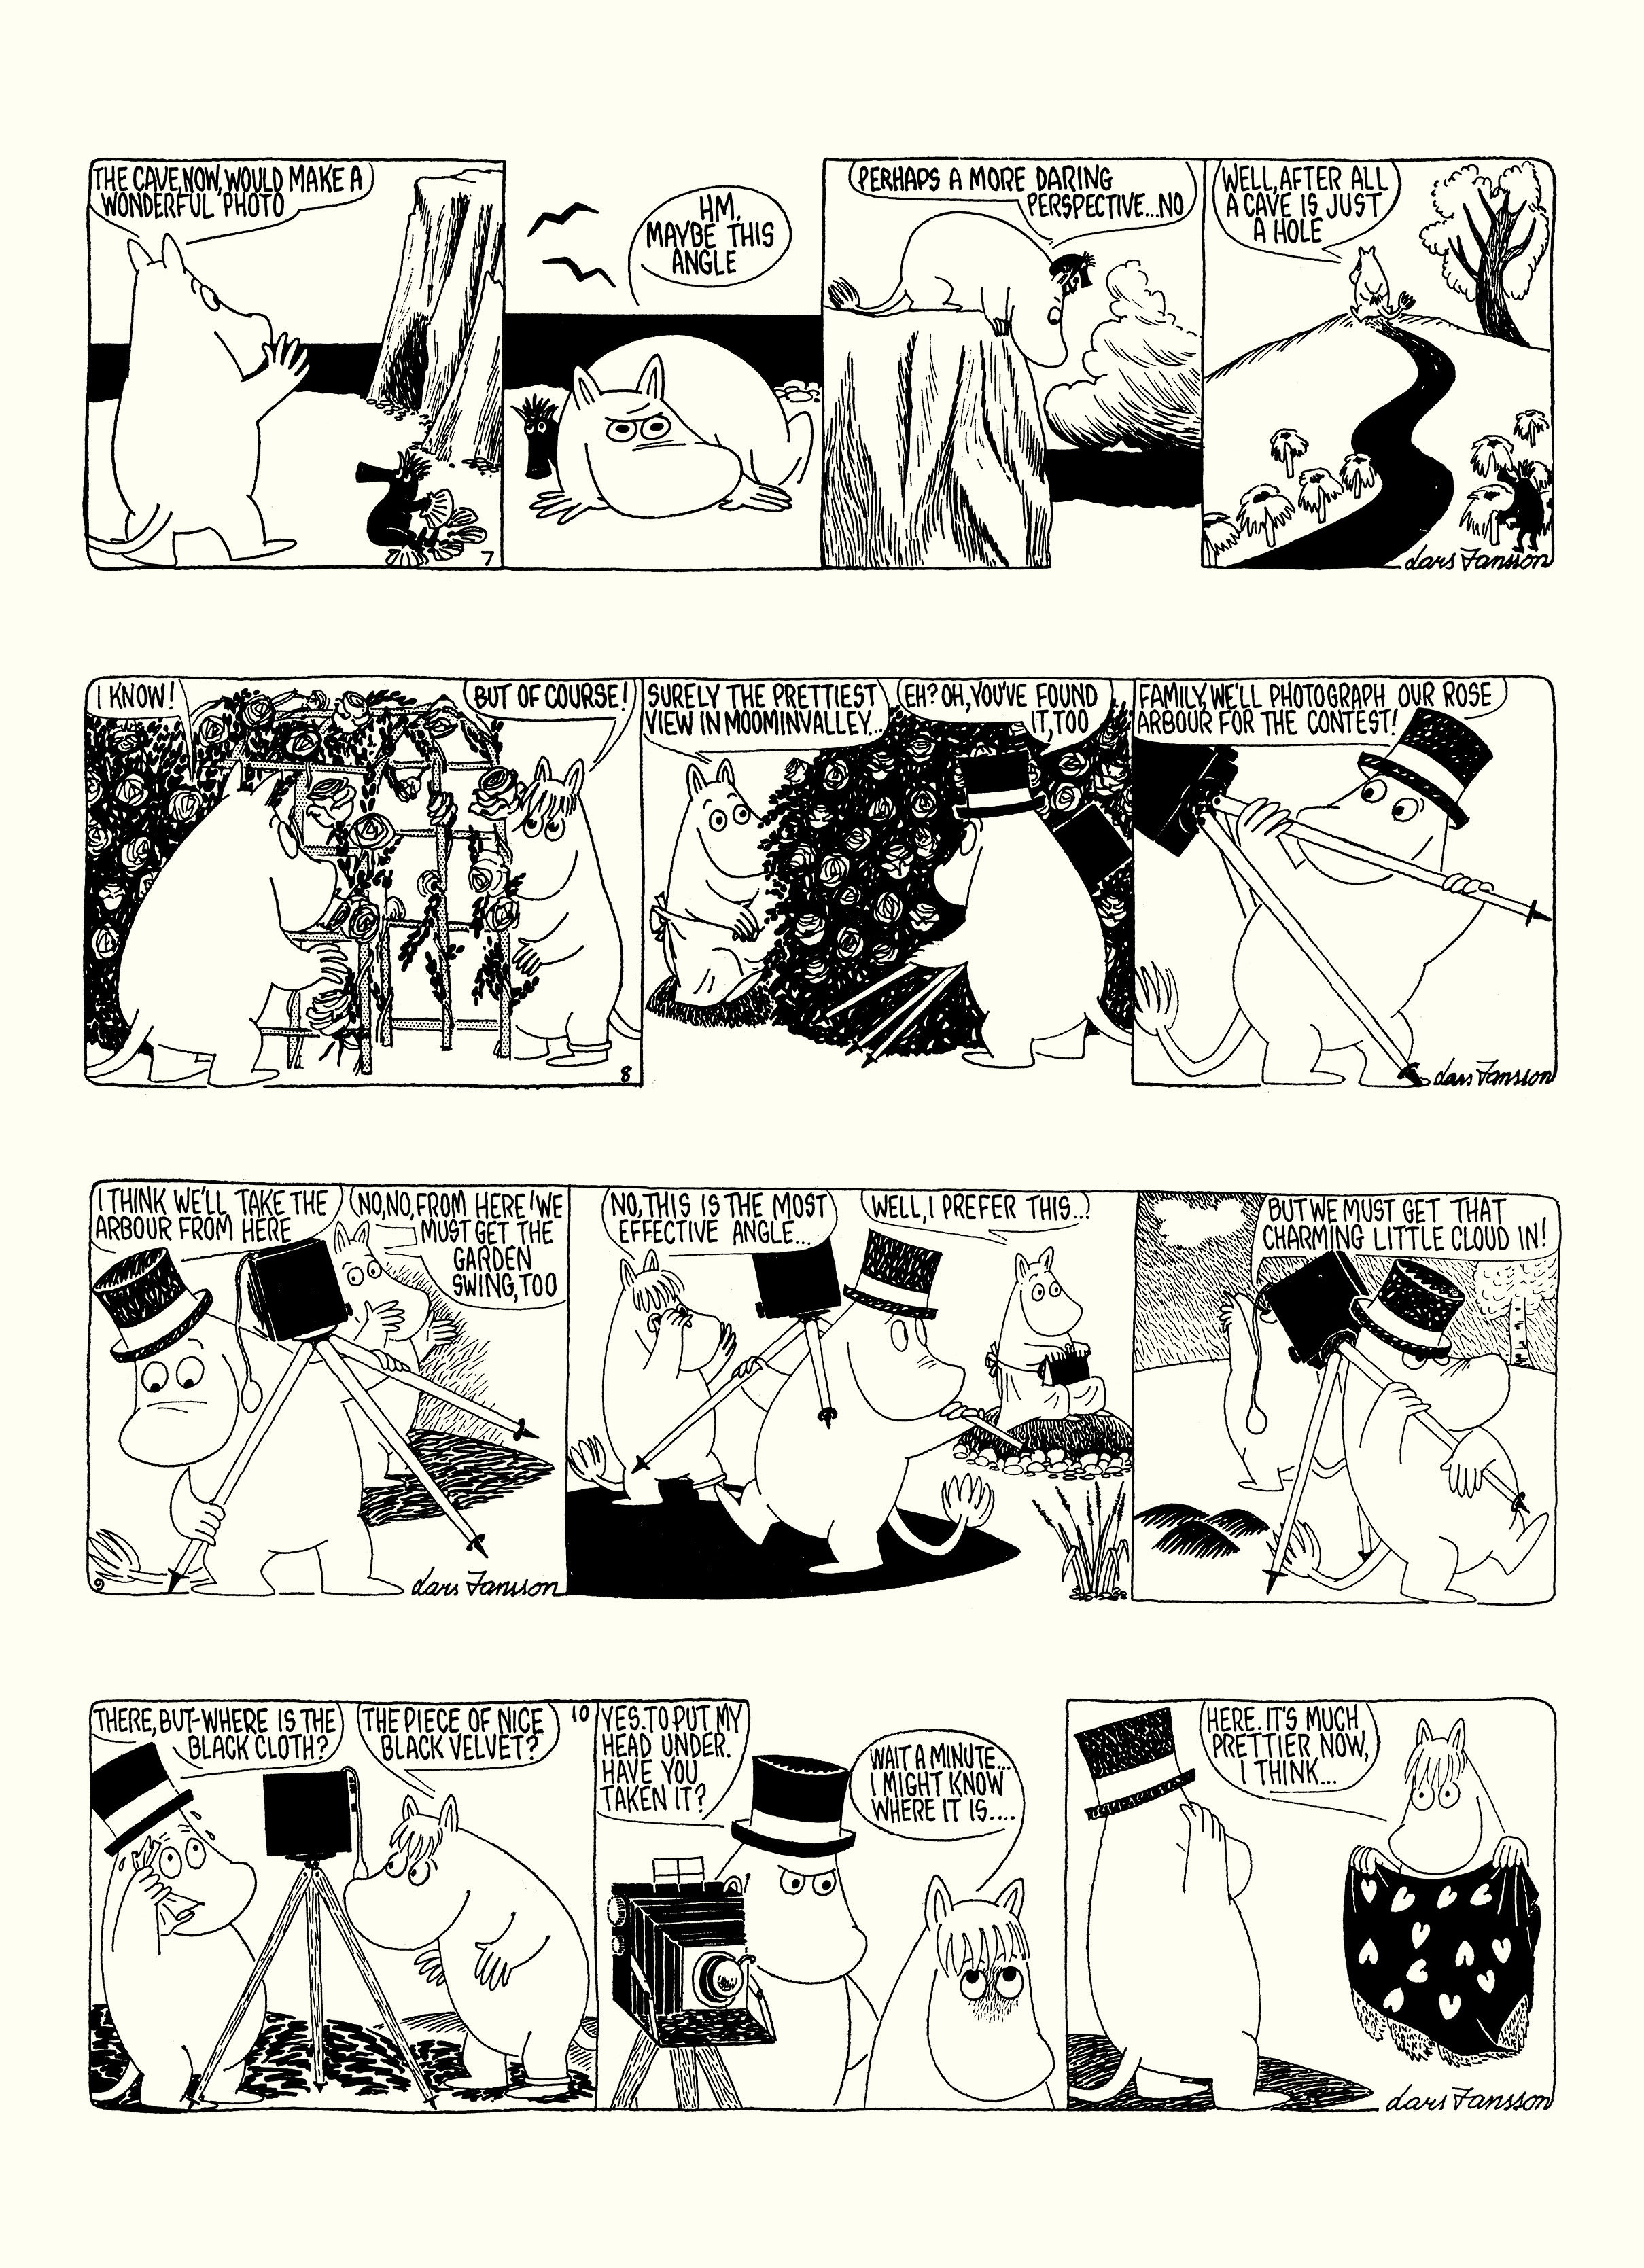 Read online Moomin: The Complete Lars Jansson Comic Strip comic -  Issue # TPB 8 - 29